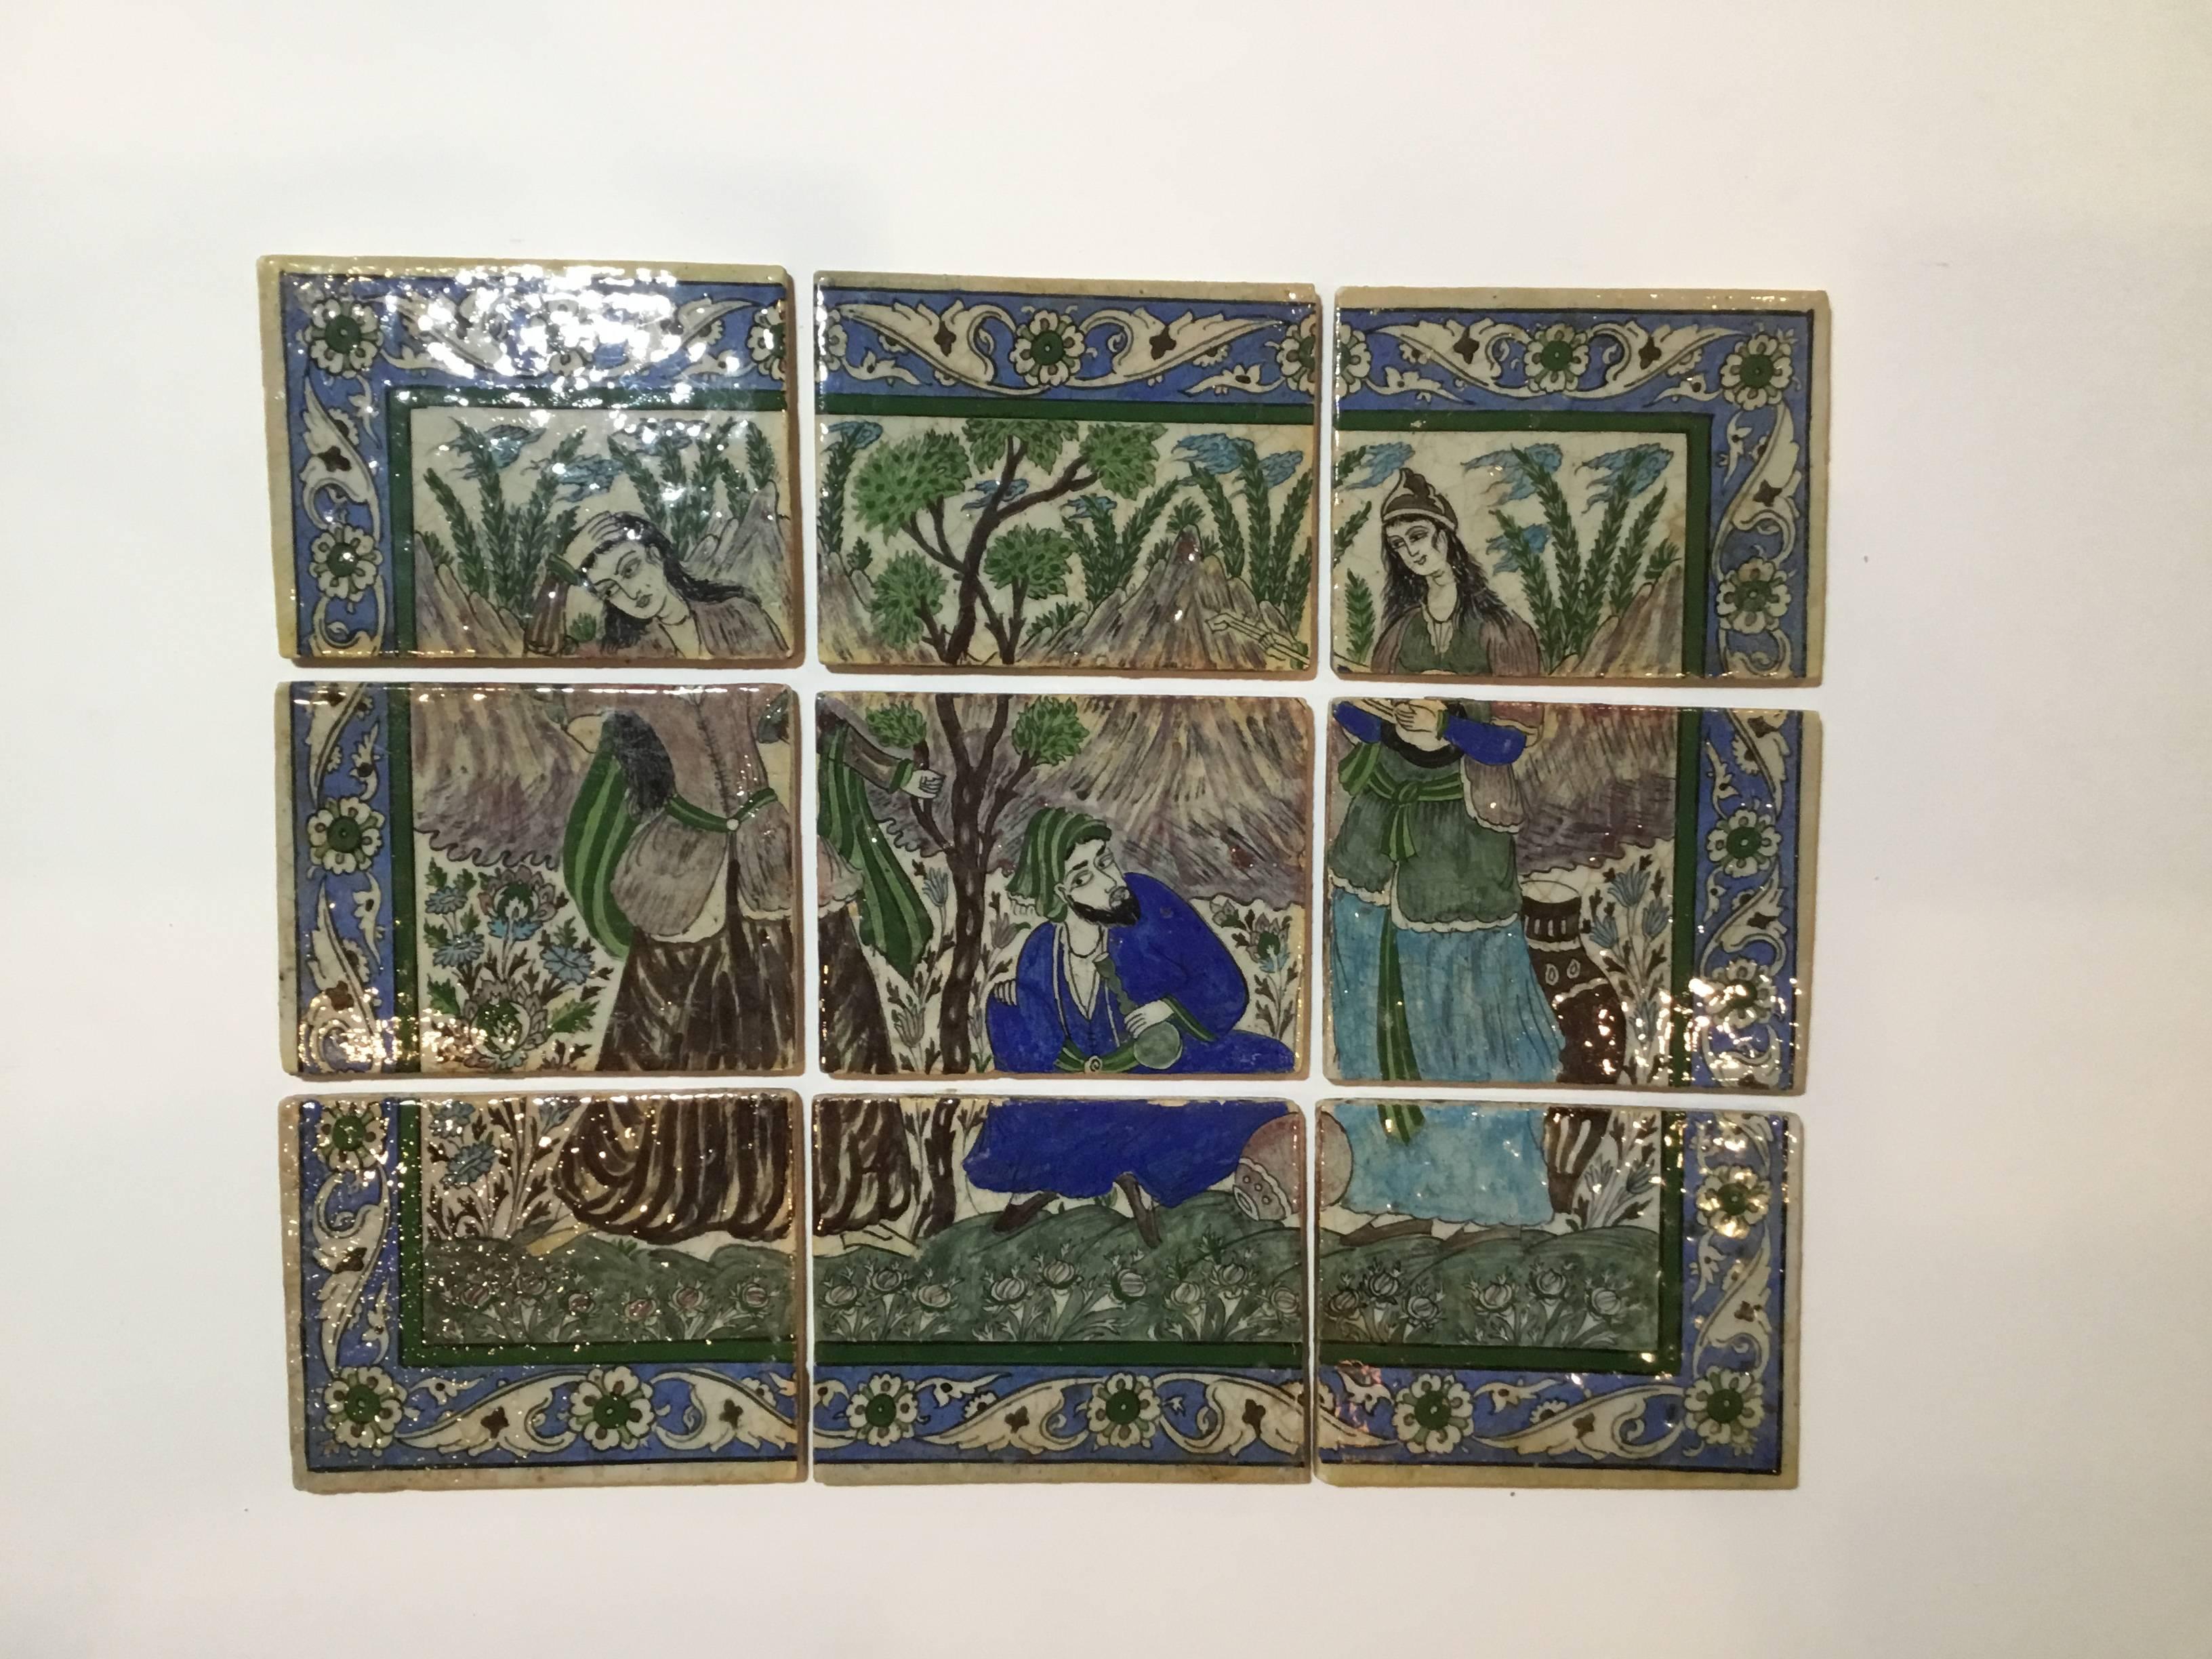 One of a kind Vintage set of nine lose Ceramic tile all hand-painted with garden motif, beautiful vines and flower border all around. The set could be use as for tabletop, or embedded to a wall as decor.
Each tile size is 6”x 7”.75.